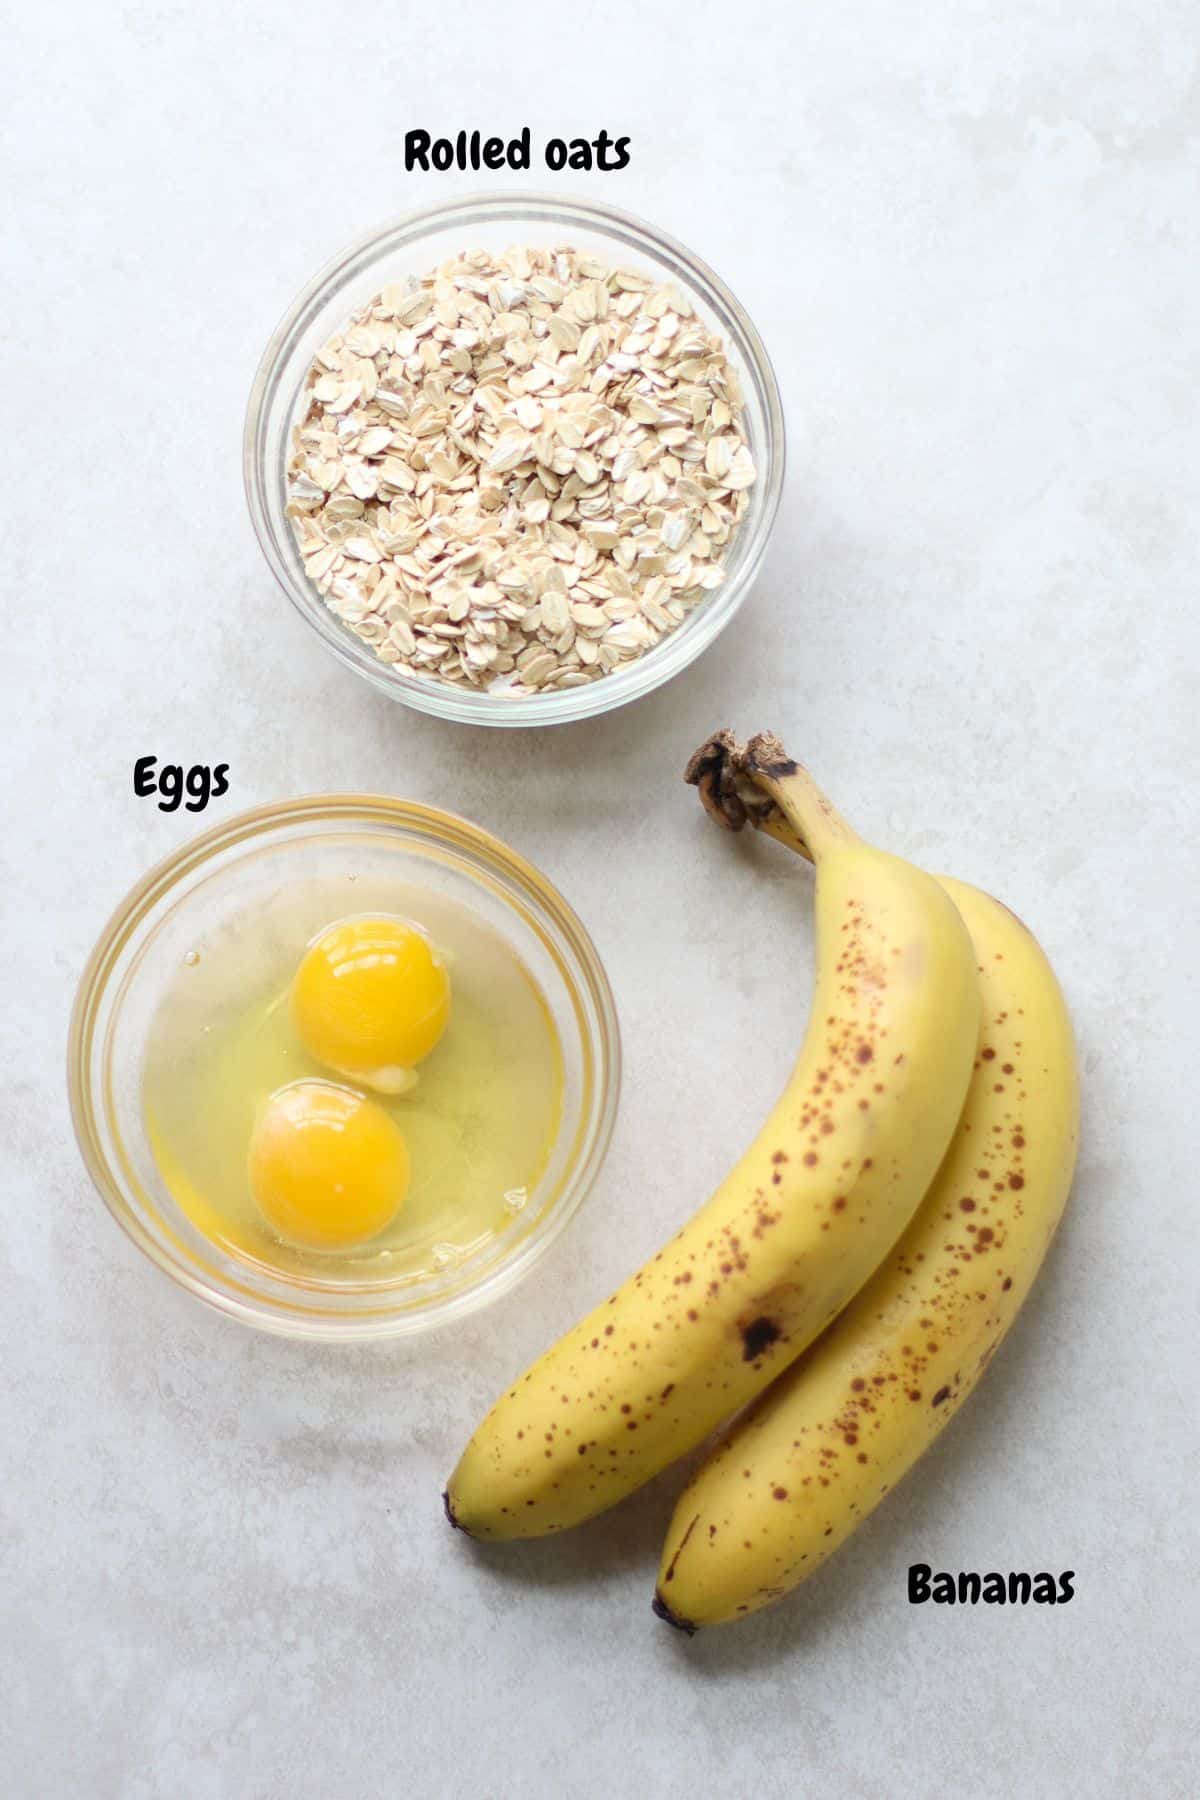 All the ingredients to make banana oat pancakes laid out on a white background.